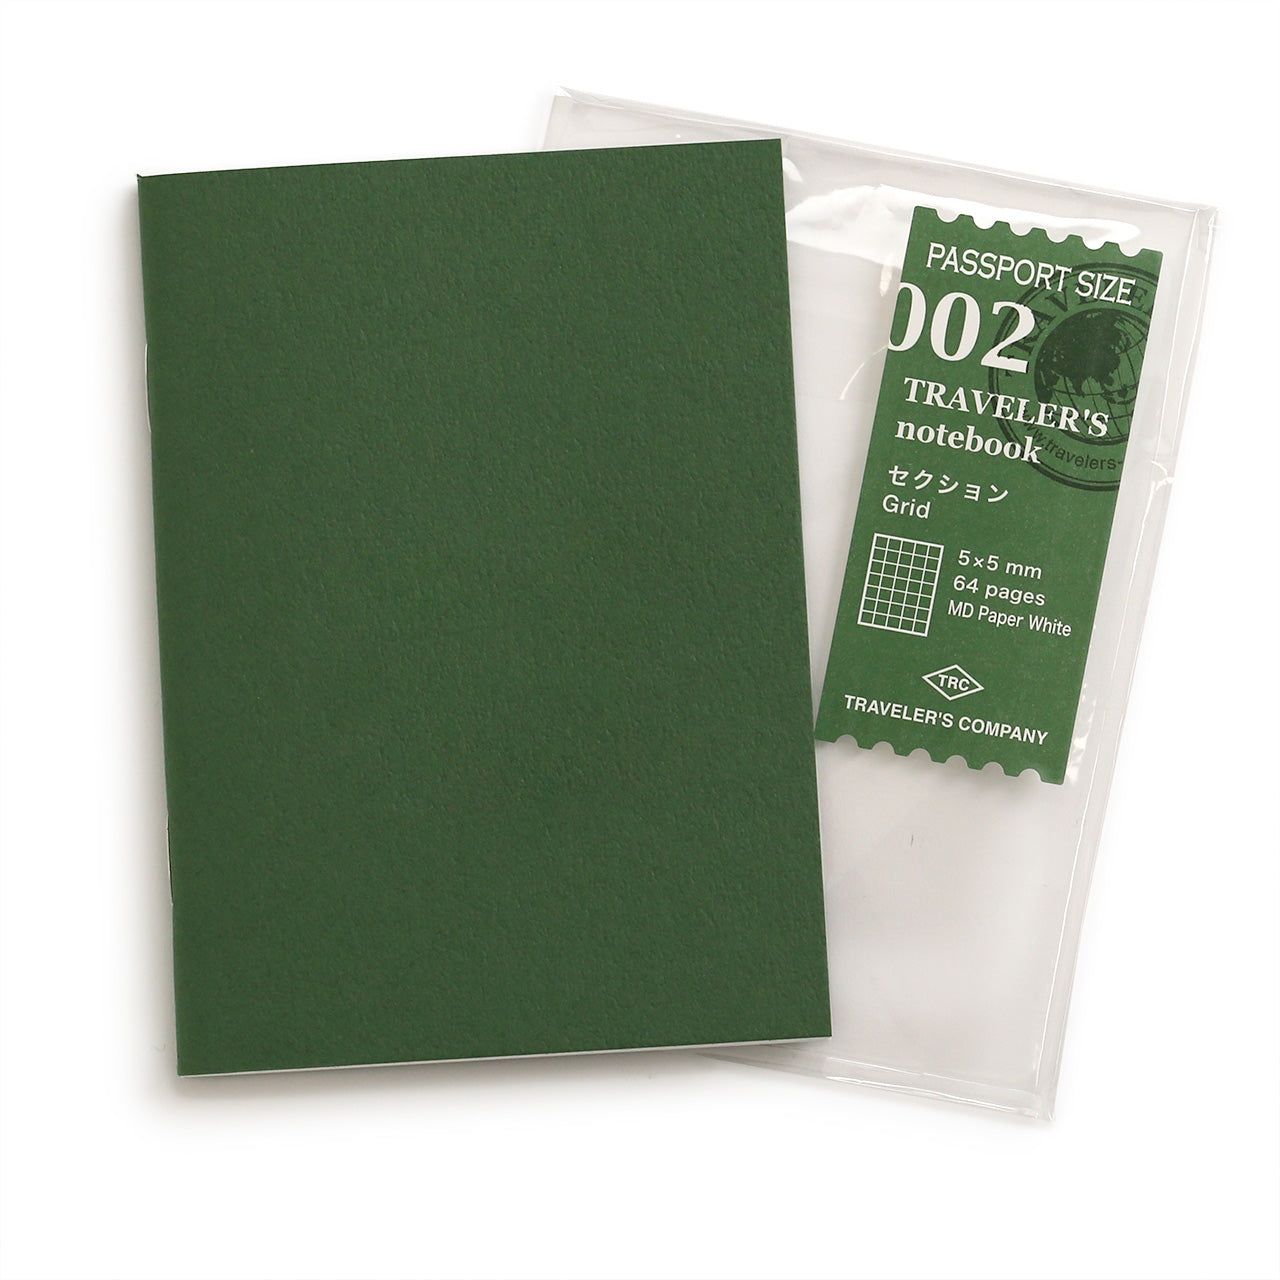 002 refill 5x5mm grid notebook with 64 pages of MD paperpassport size 